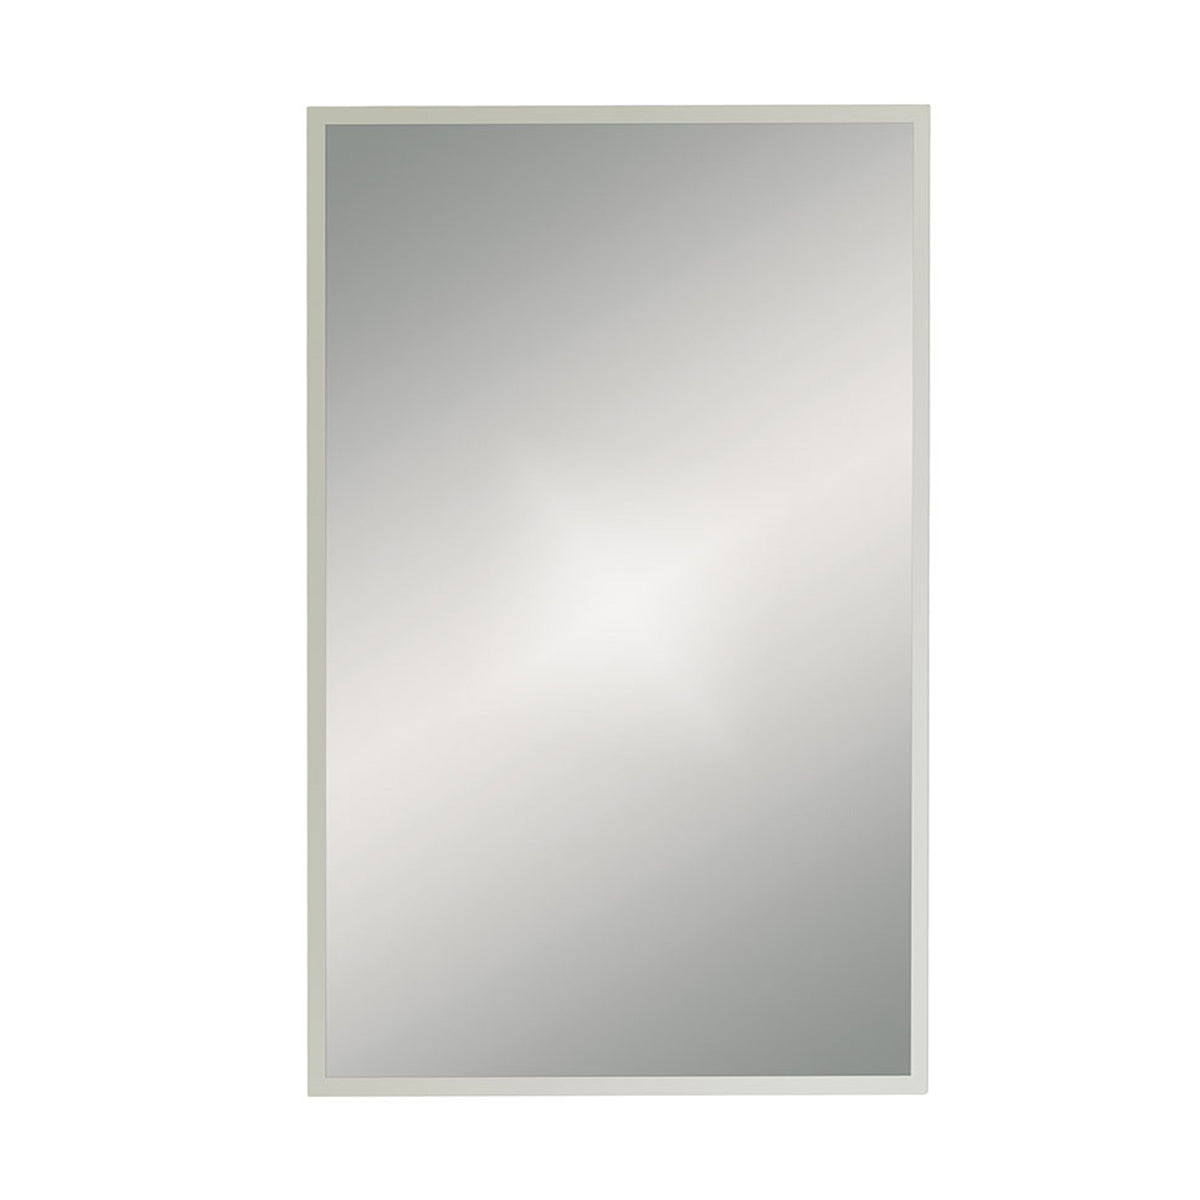 harbour rectangular mirror brushed stainless steel frame 50x80cm